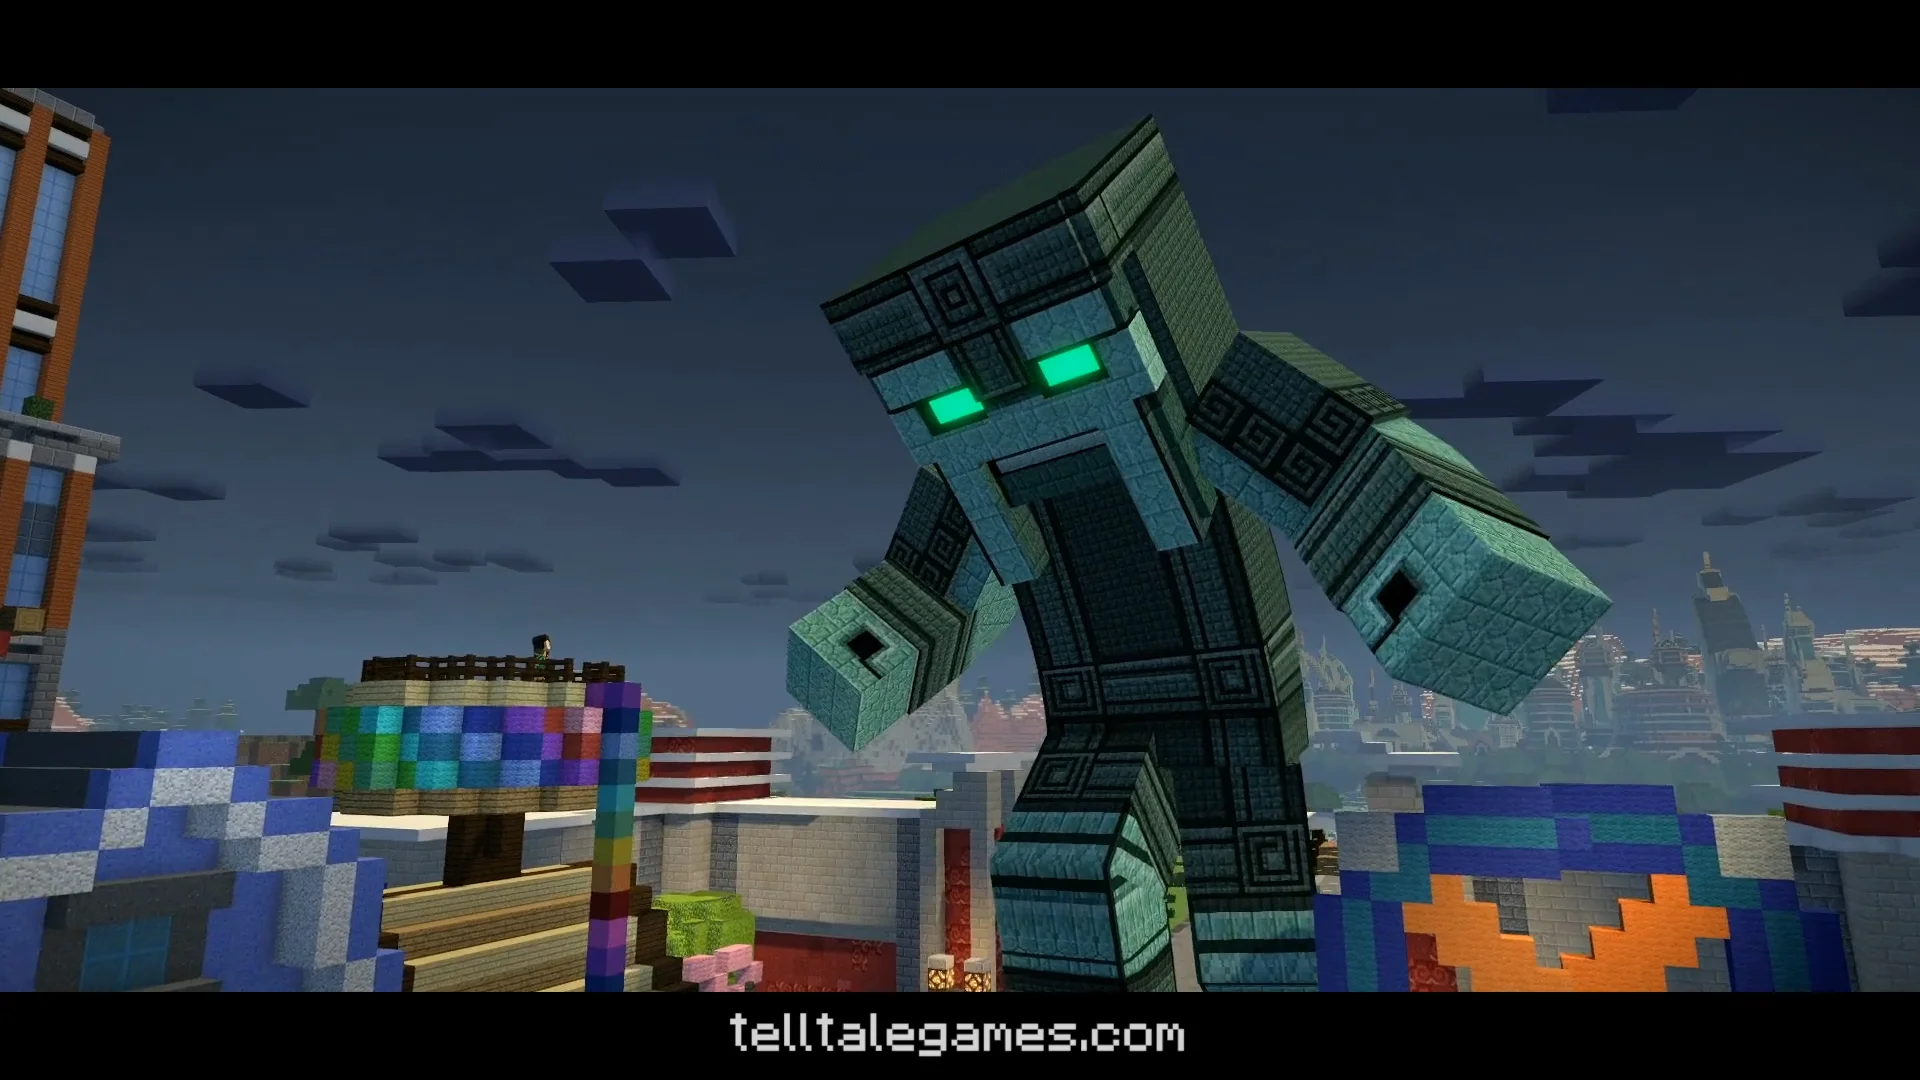 Minecraft: Story Mode: Where to Watch and Stream Online